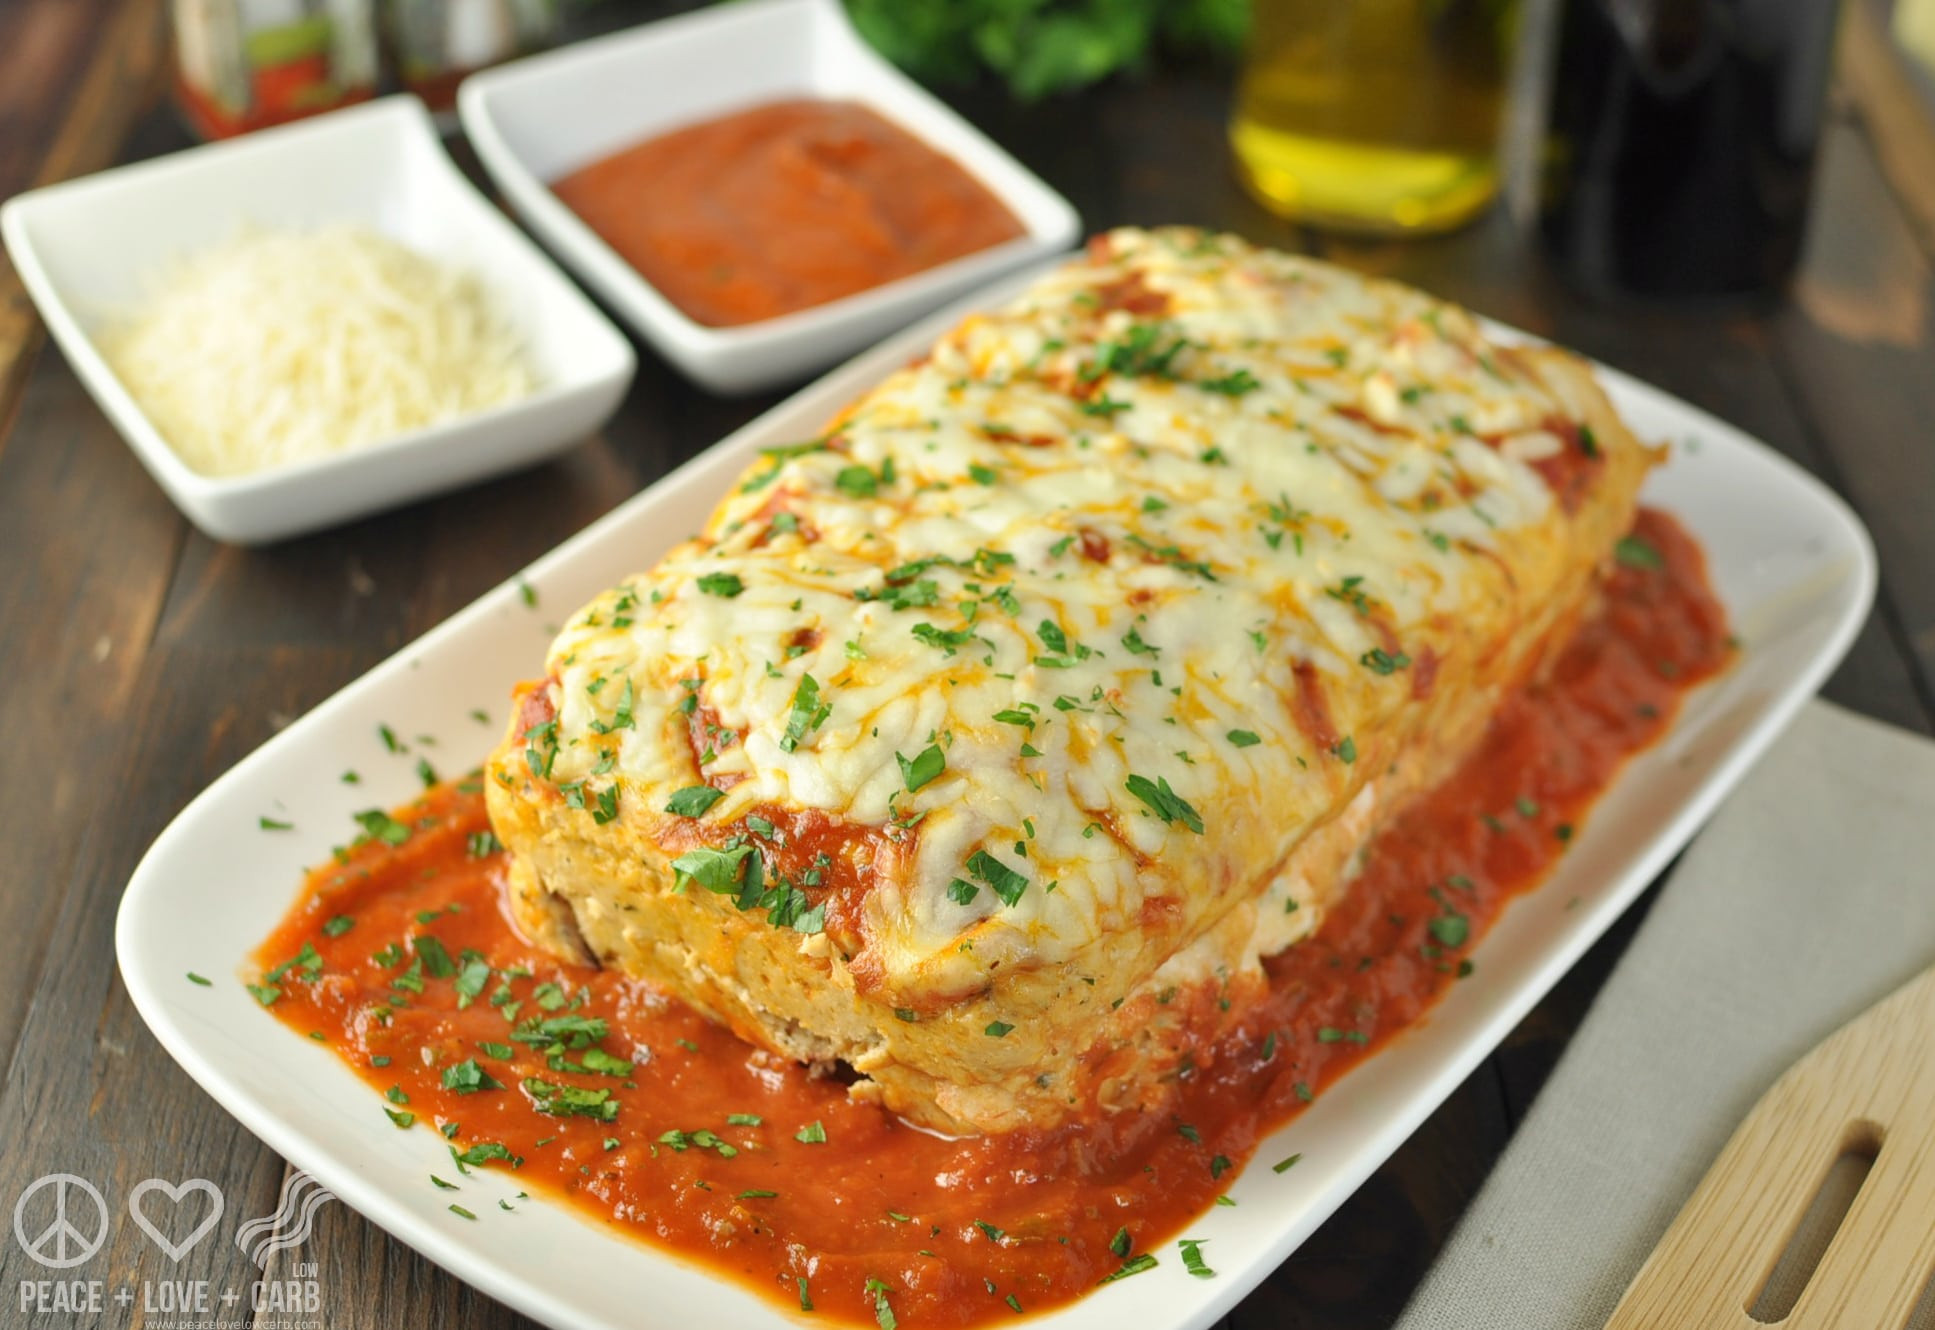 Recipes For Low Carb
 Stuffed Chicken Parmesan Keto Meatloaf